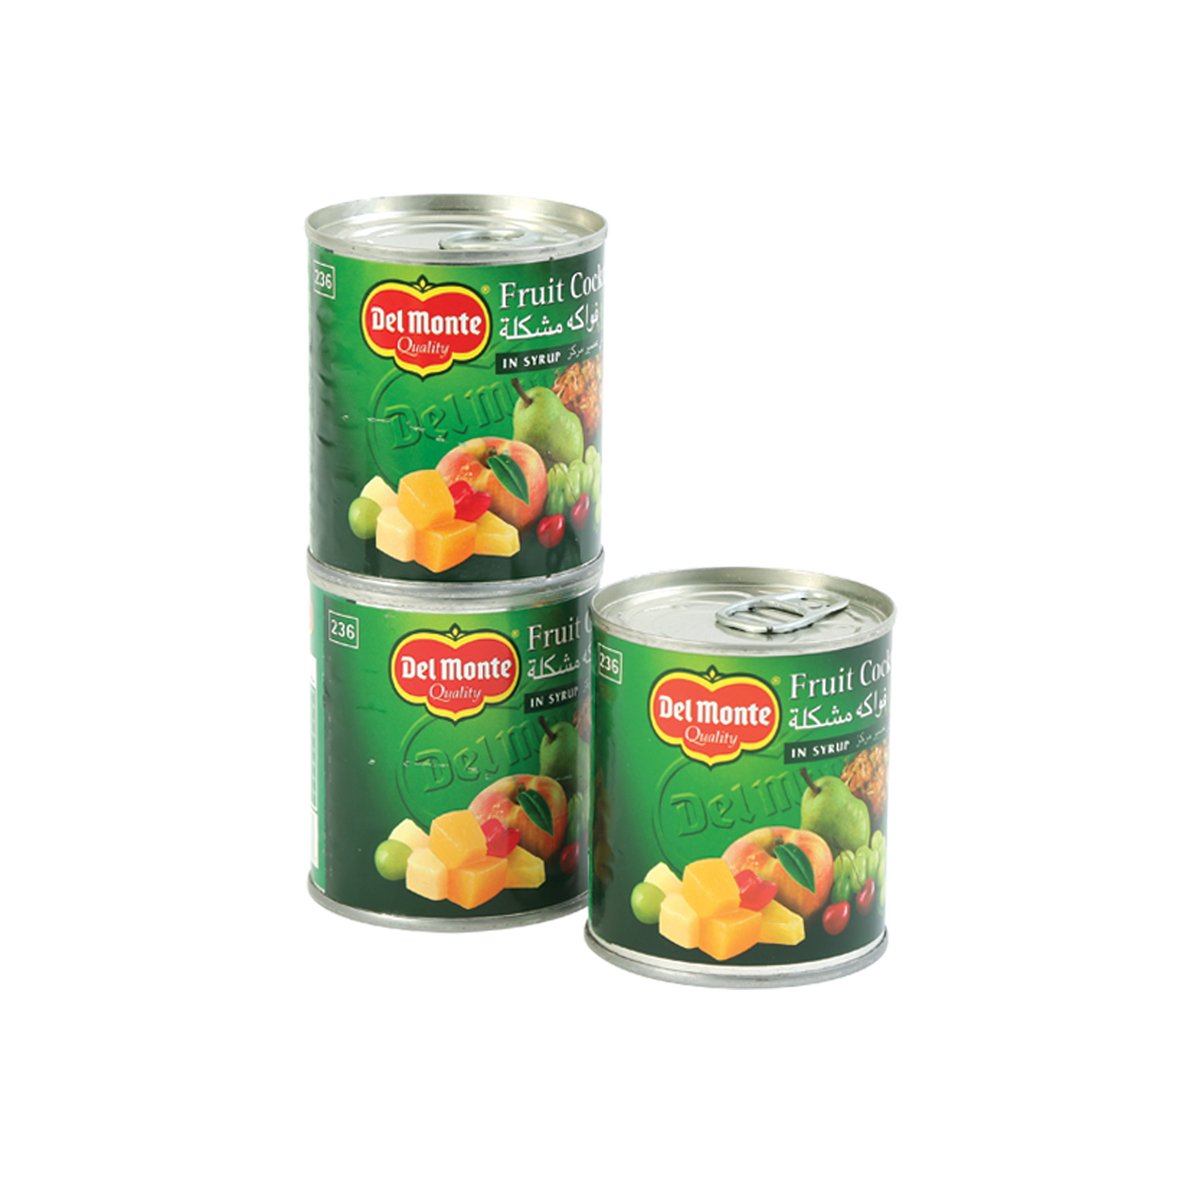 Del Monte Fruit Cocktail In Syrup 3 x 227 g